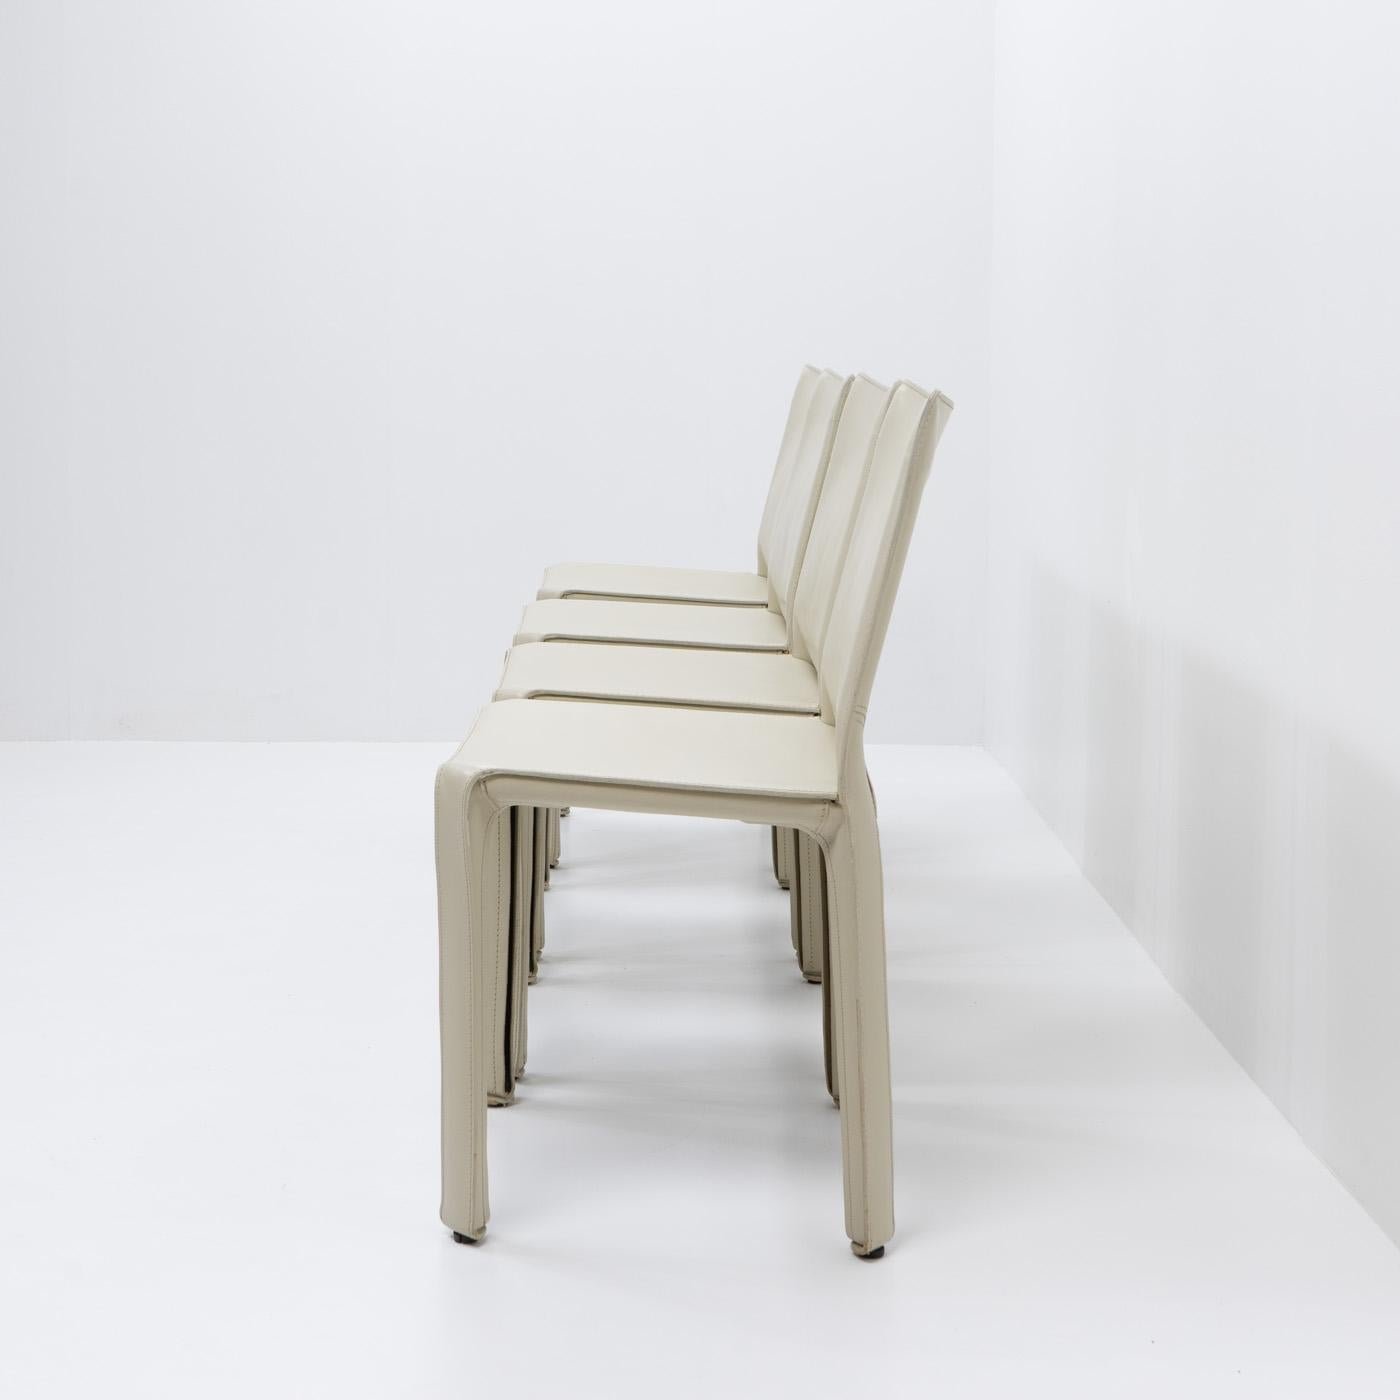 Late 20th Century Cab 412 Chairs in Cream Leather by Mario Bellini for Cassina, Set of 4 For Sale